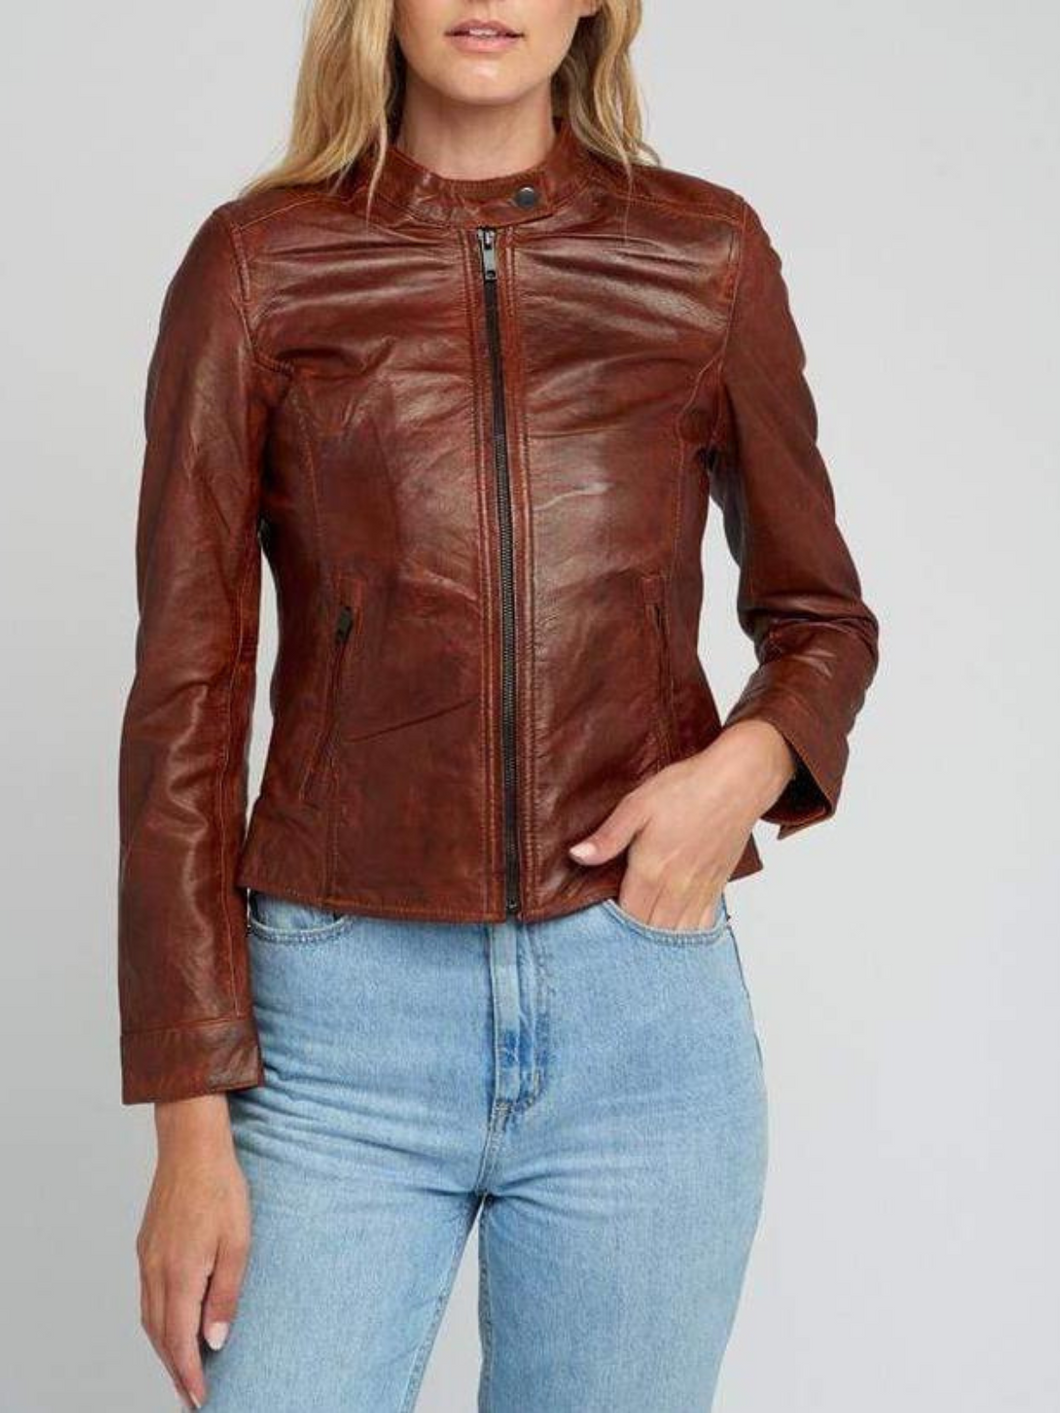 Women’s Brown Cafe Racer Leather Jacket